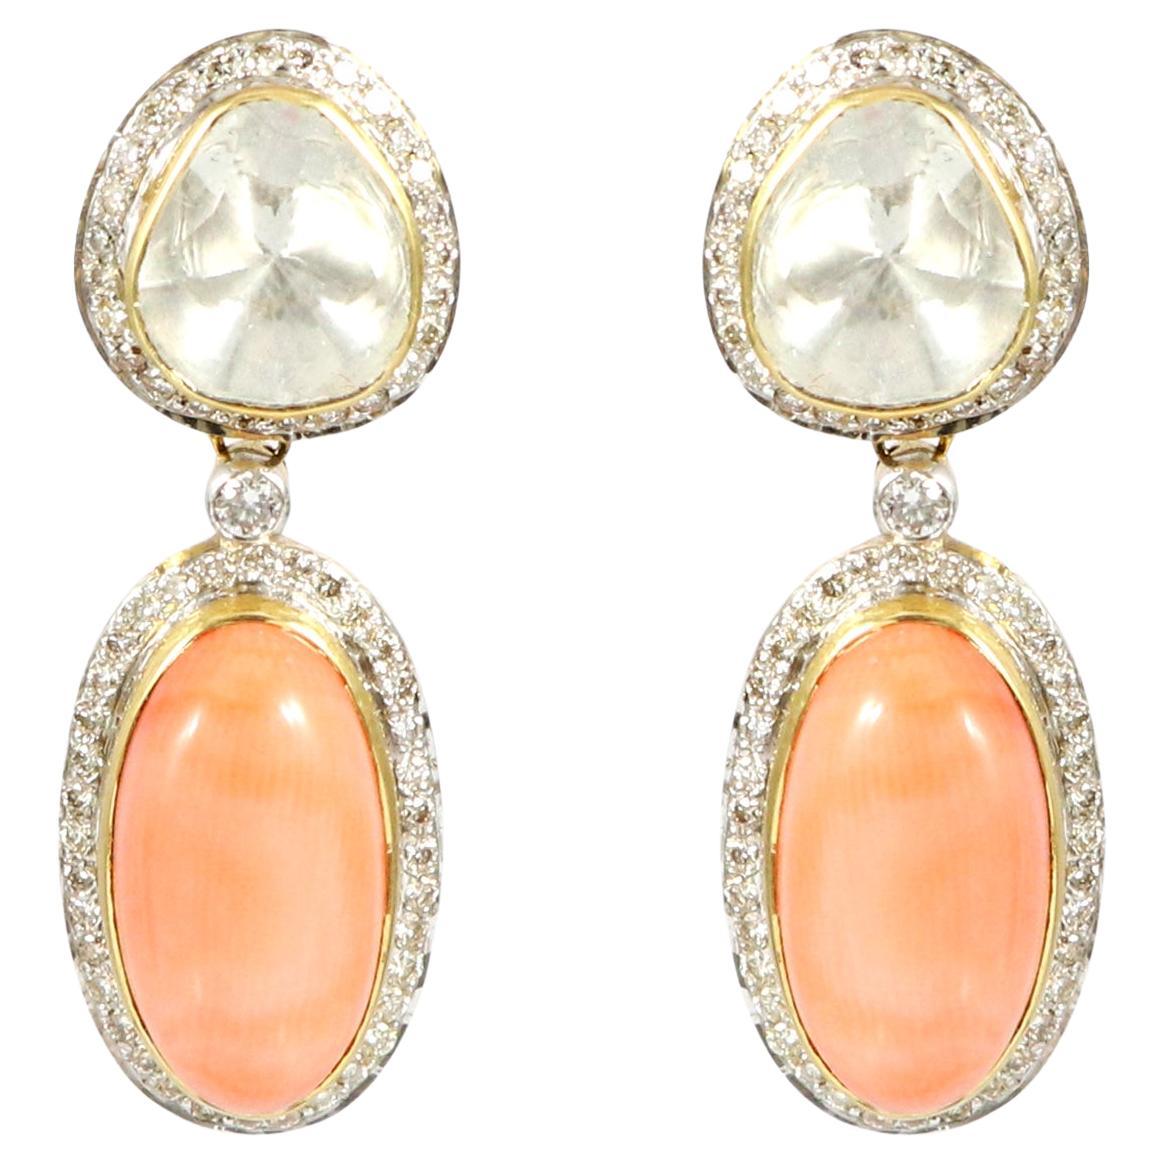 Coral Statement Earrings 0899